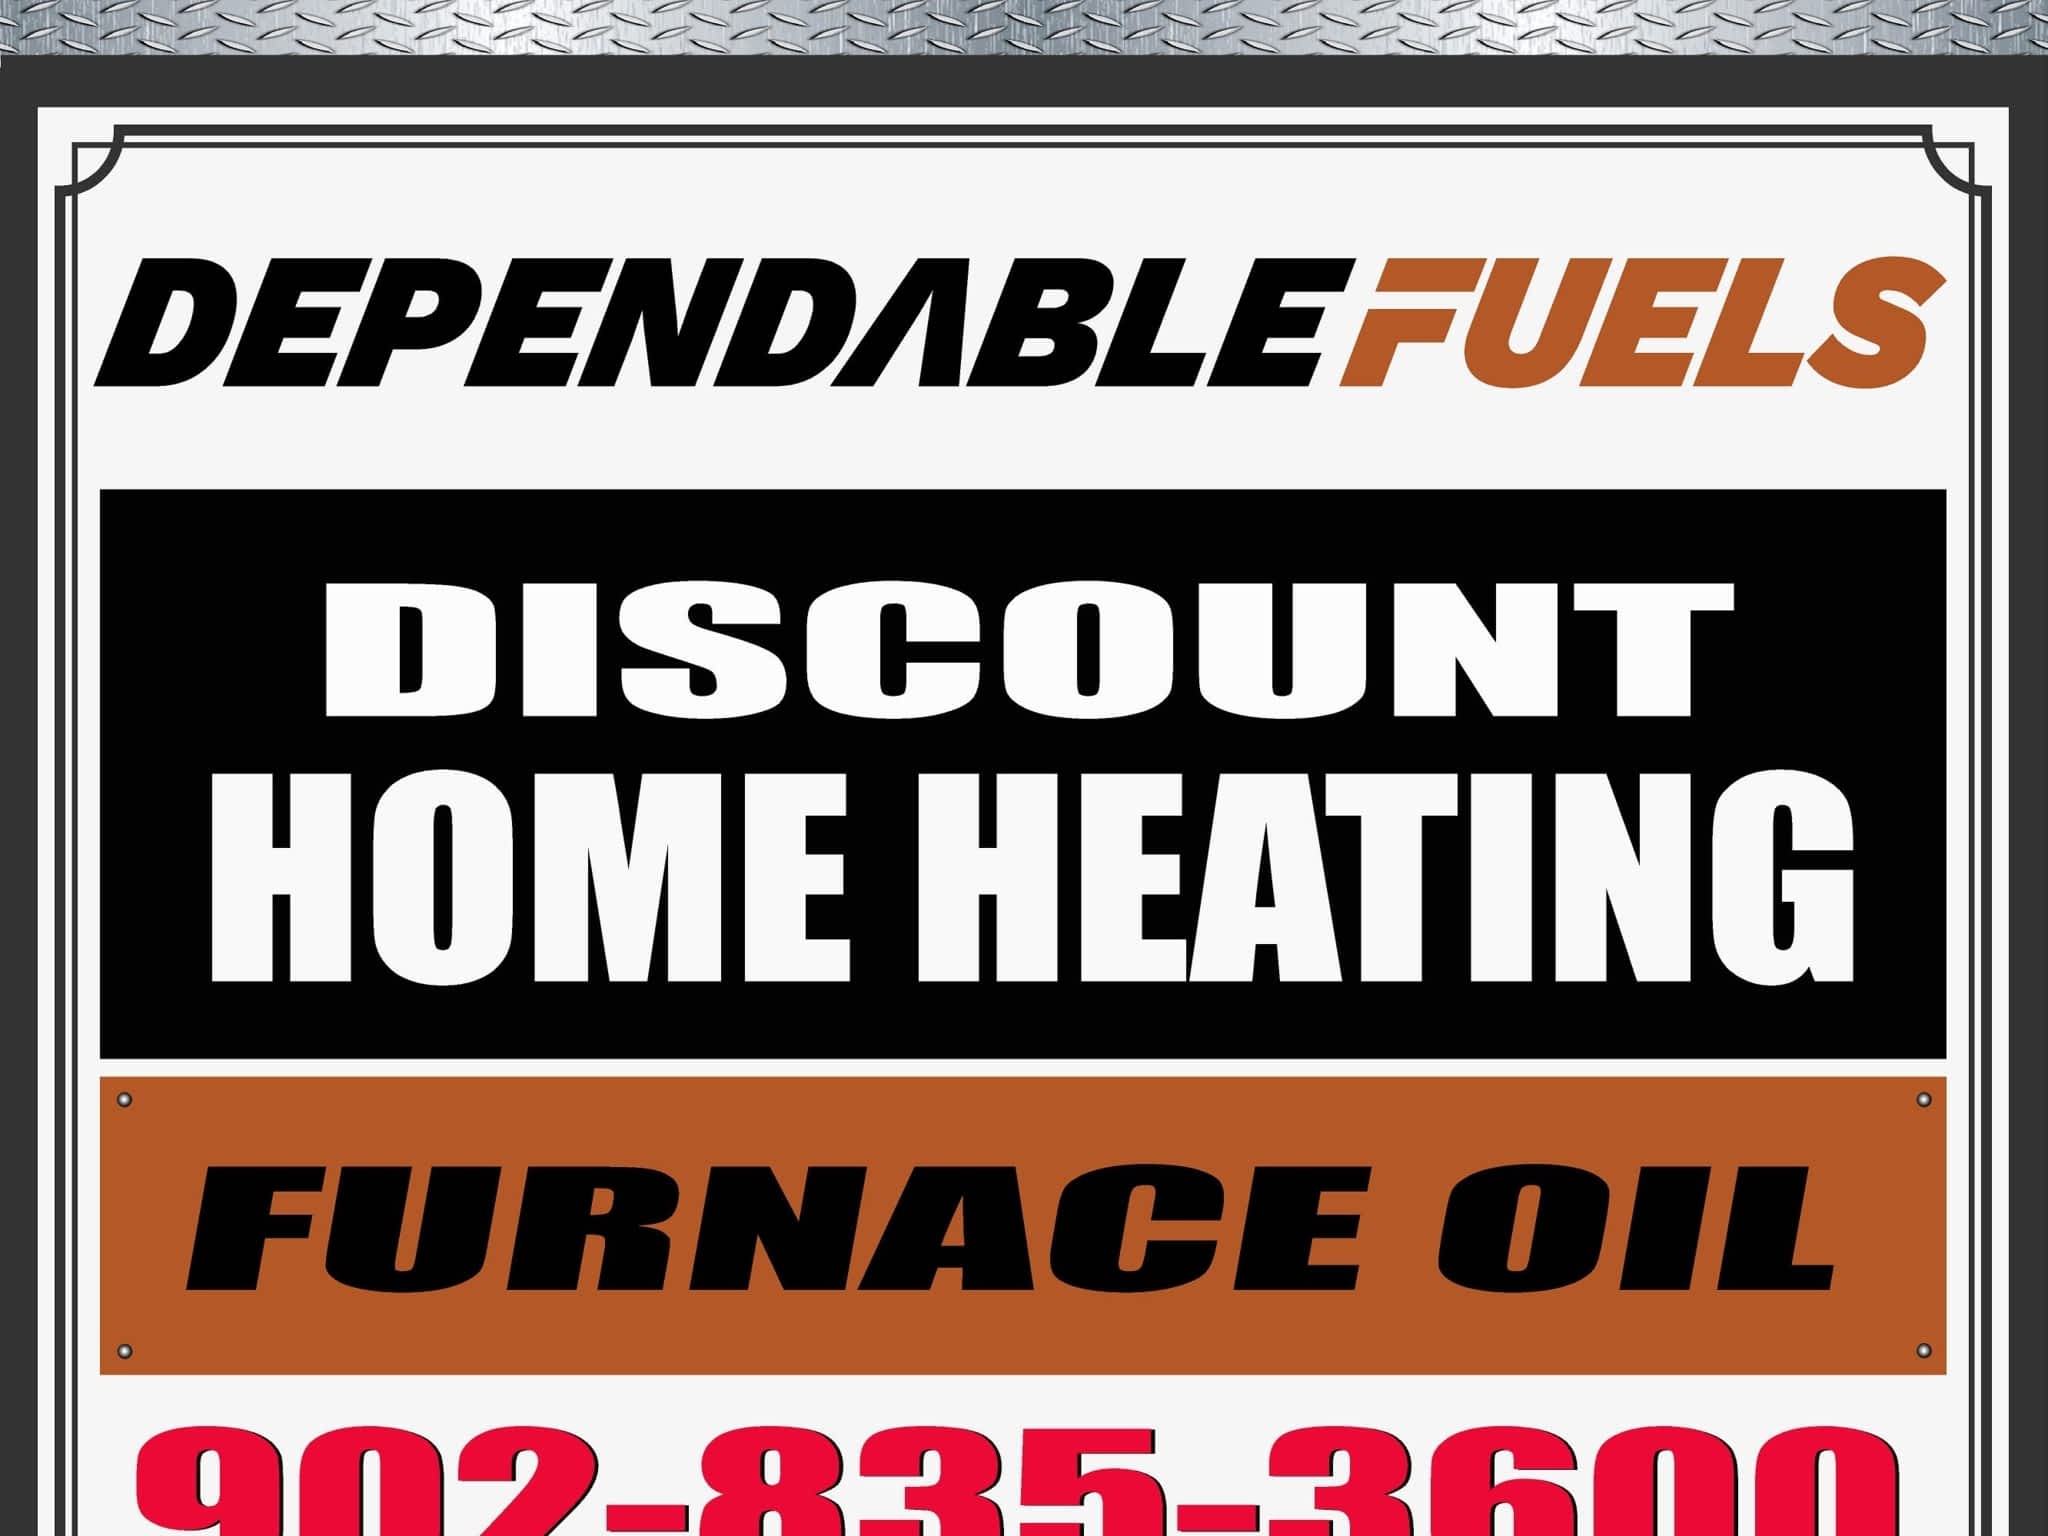 photo Dependable Fuels (Discount Home Heating)